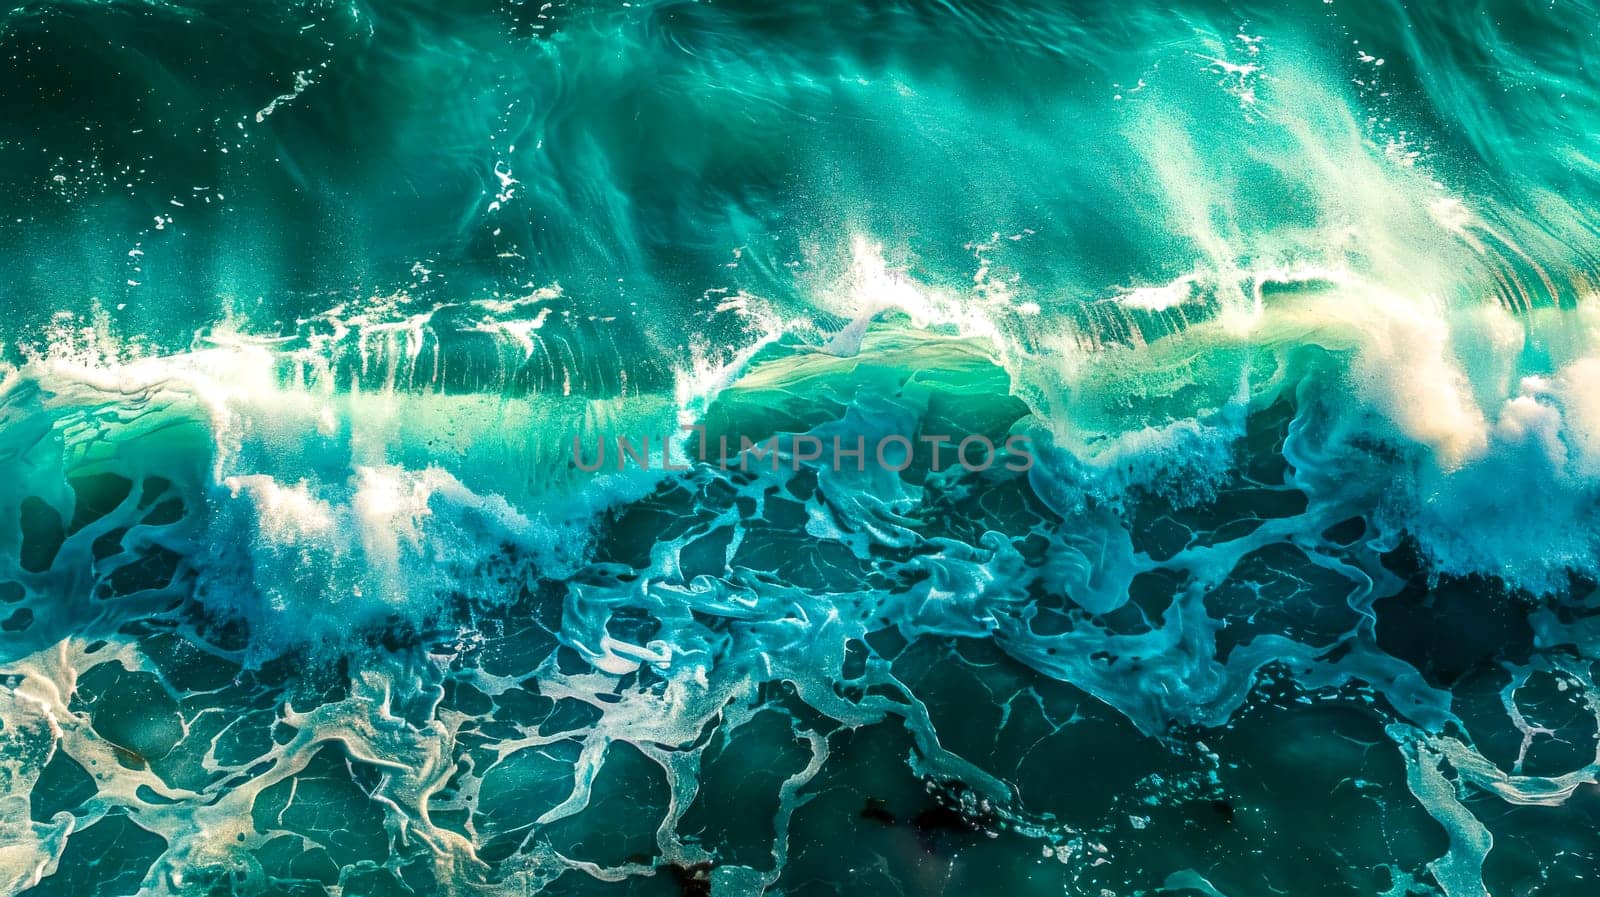 Aerial view of crashing ocean wave by Edophoto